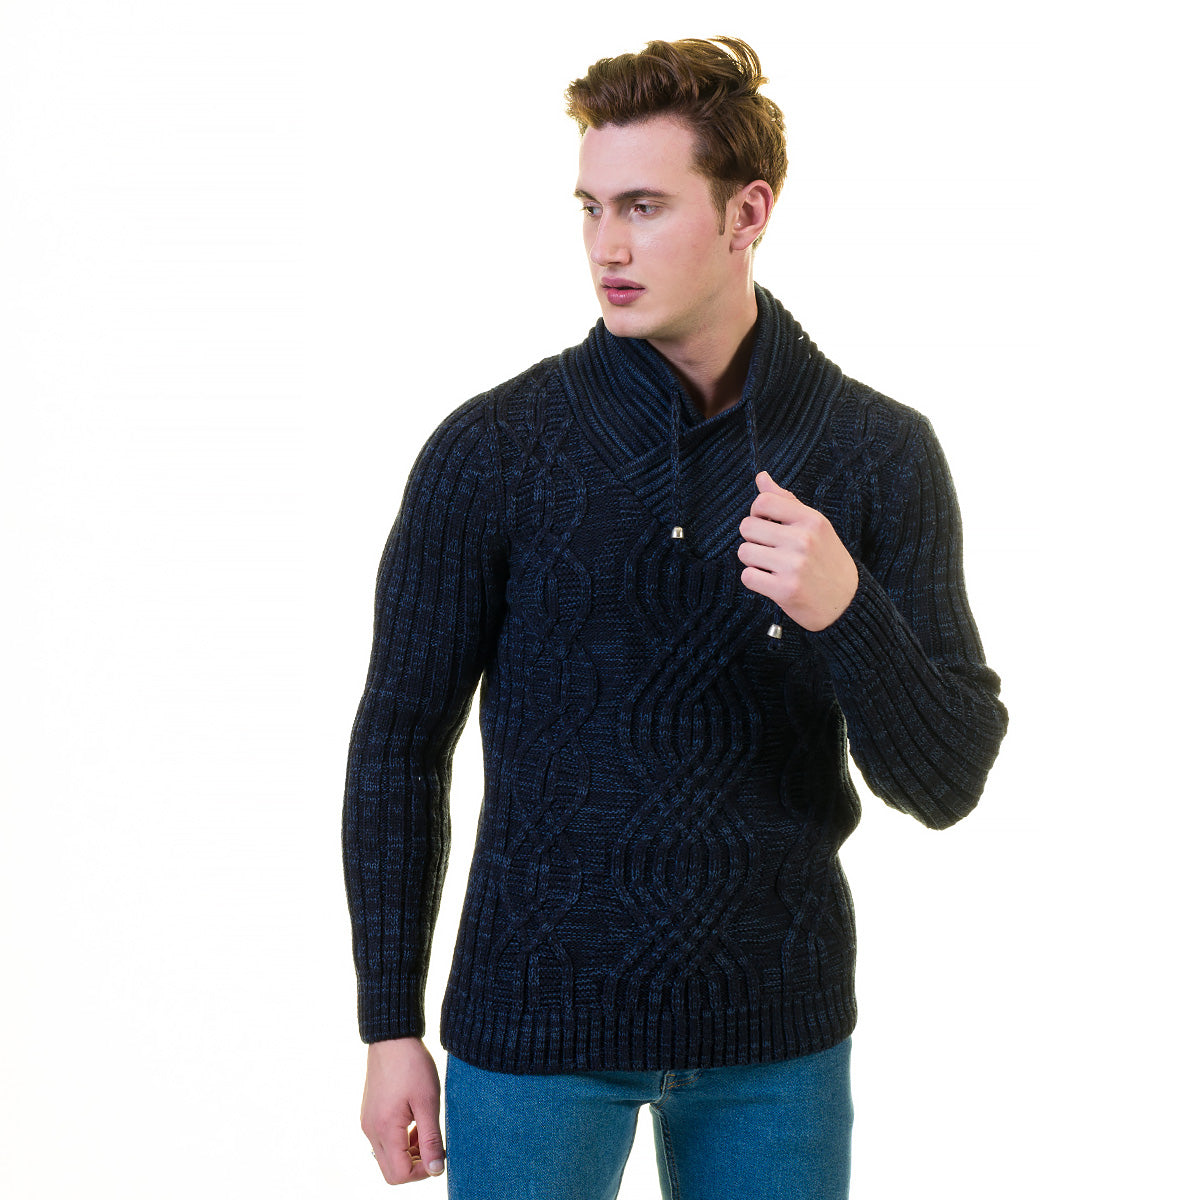 European Wool Luxury Zippered With Sweater Jacket Warm Winter Tailor Fit